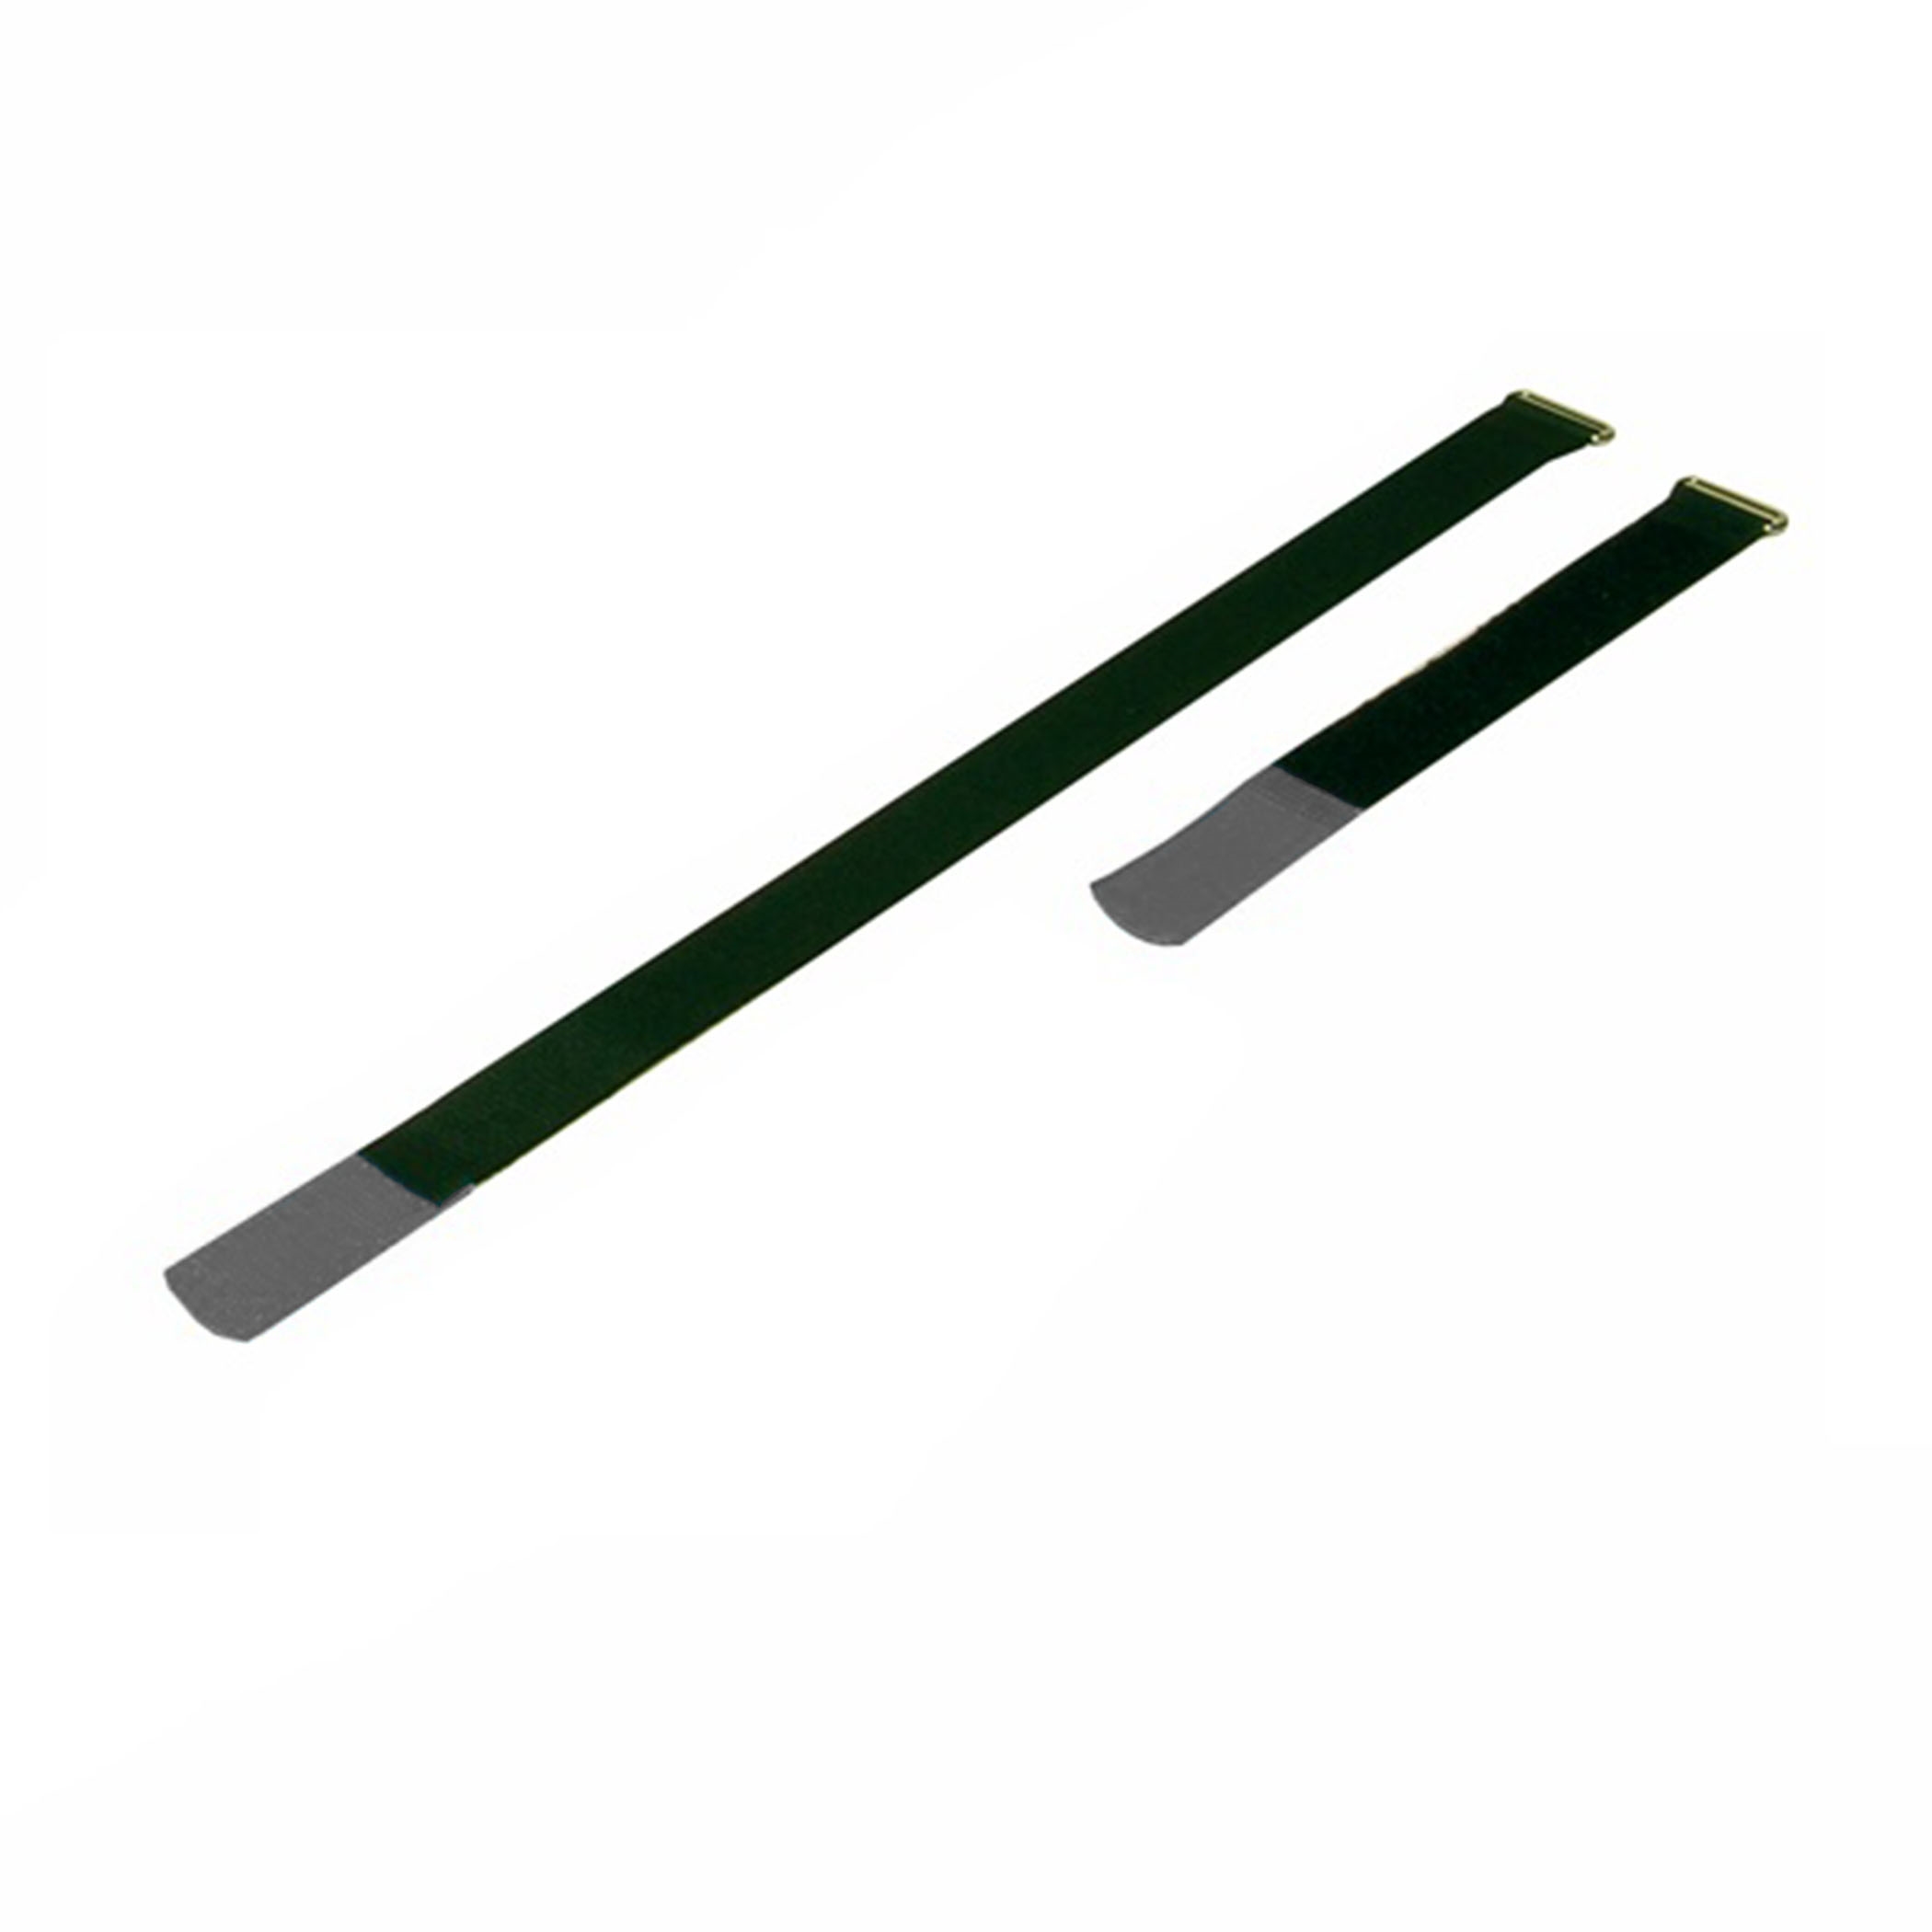 Cable Tie 300x25mm with Hook Gray, (10 pieces) - a2530-520h